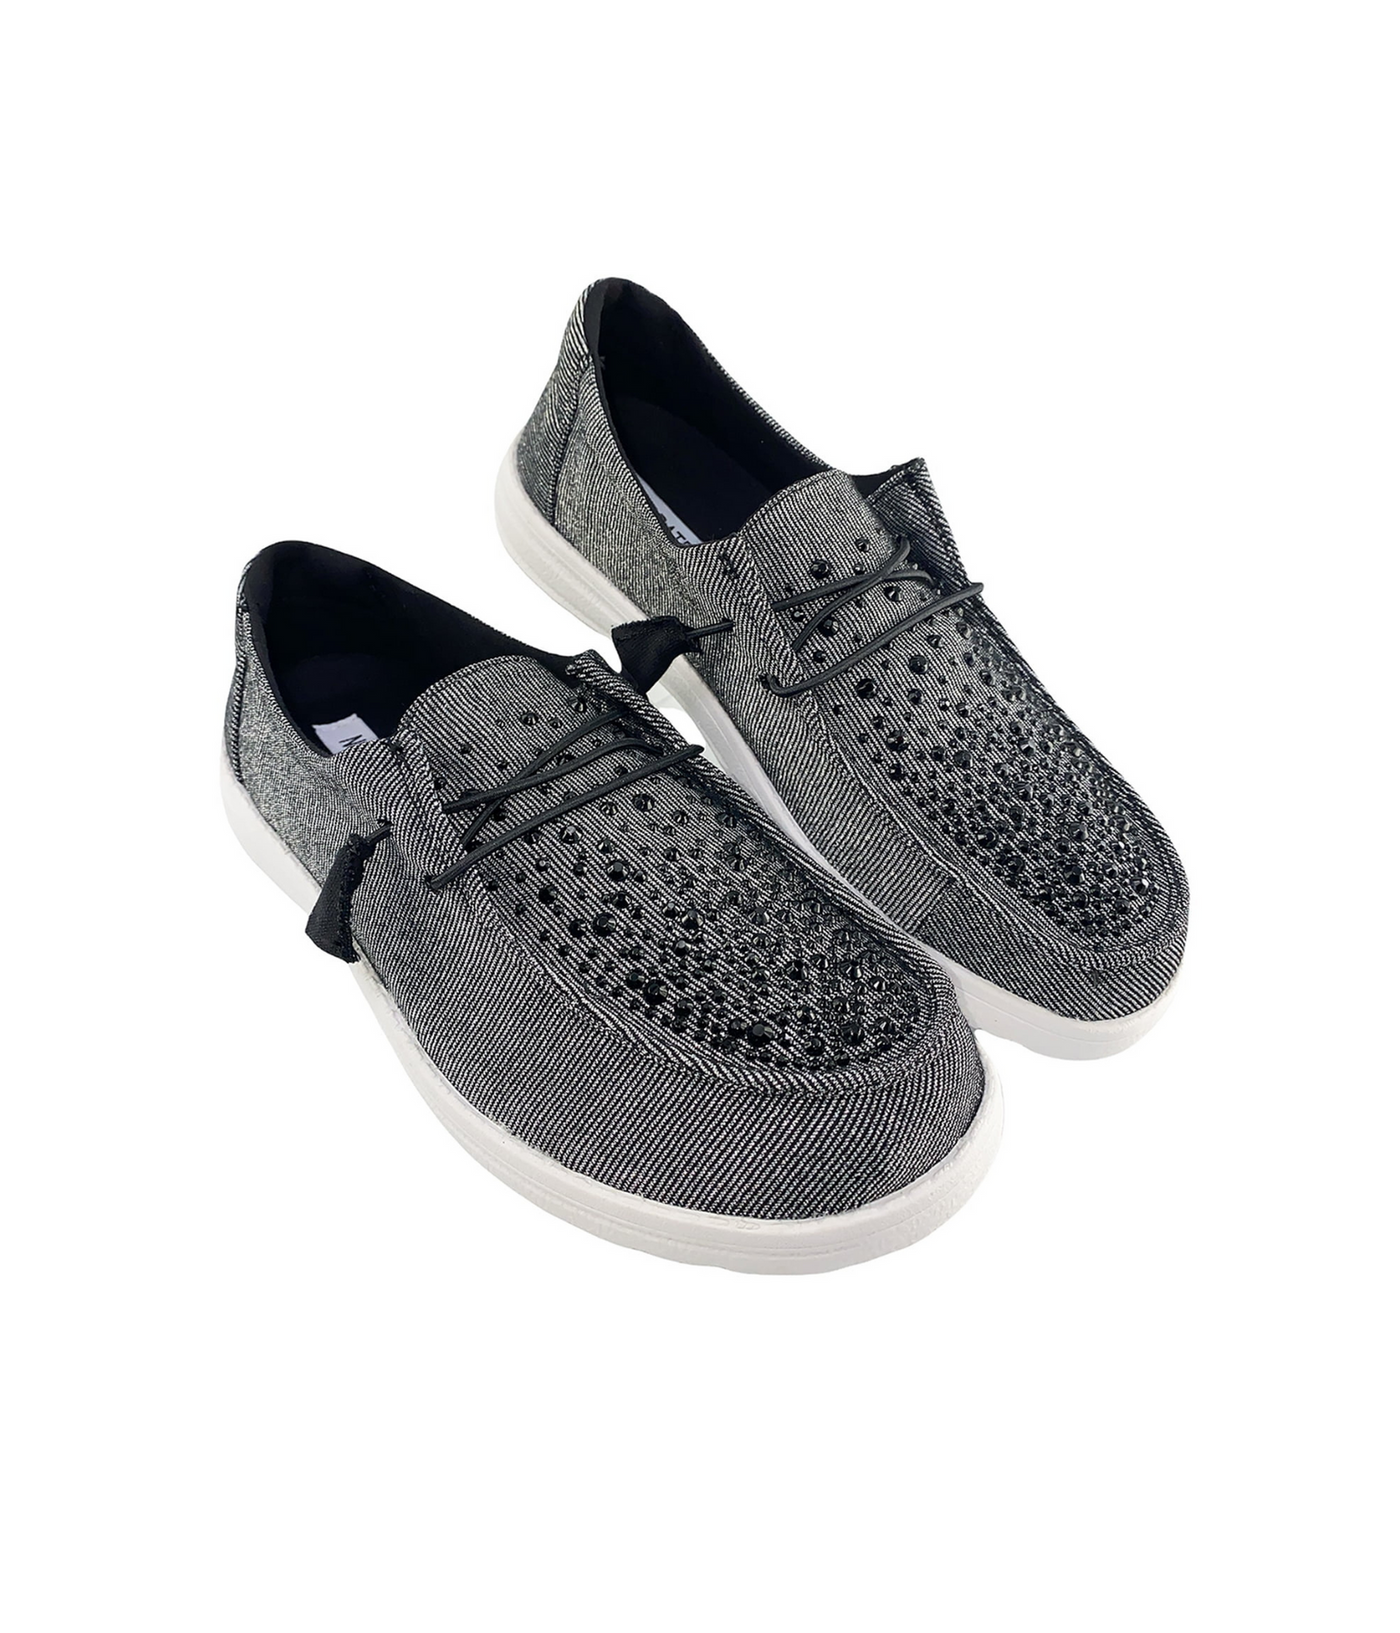 MACO WATER DROP SLIP ON'S DUDE DUPE